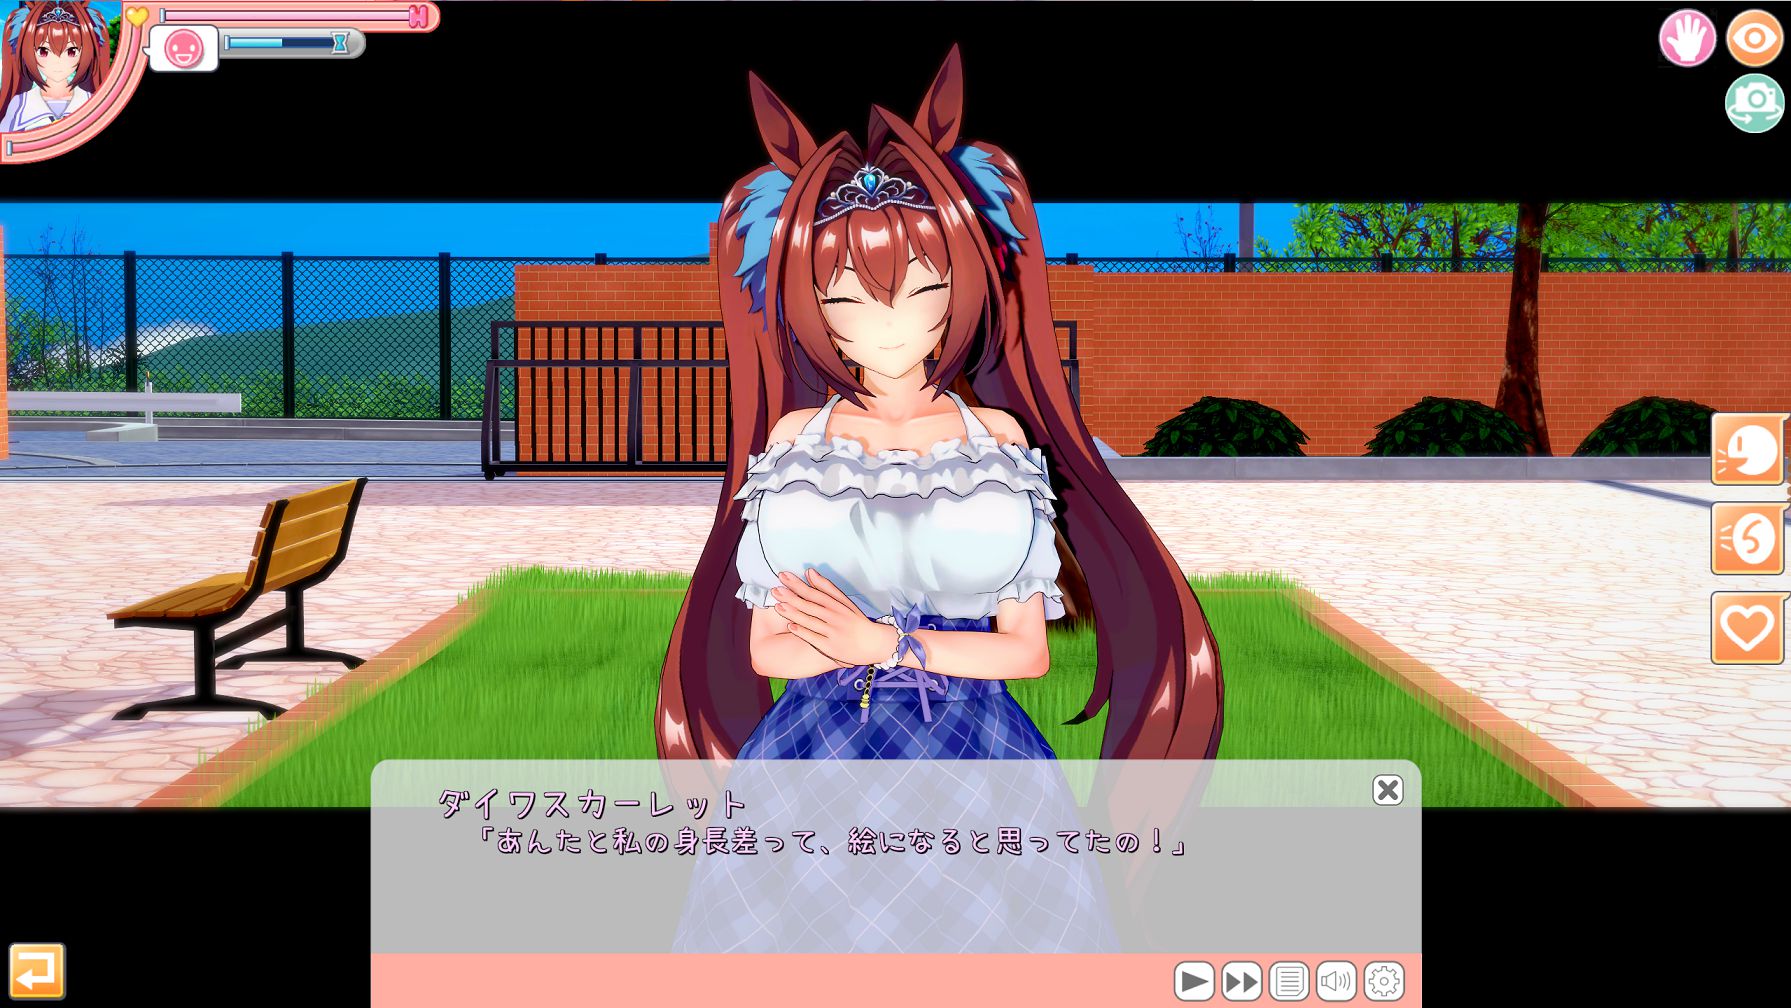 【Good news】Eroge "Koikatsu", too much fun to etch with characters of famous anime games wwwwwww 6